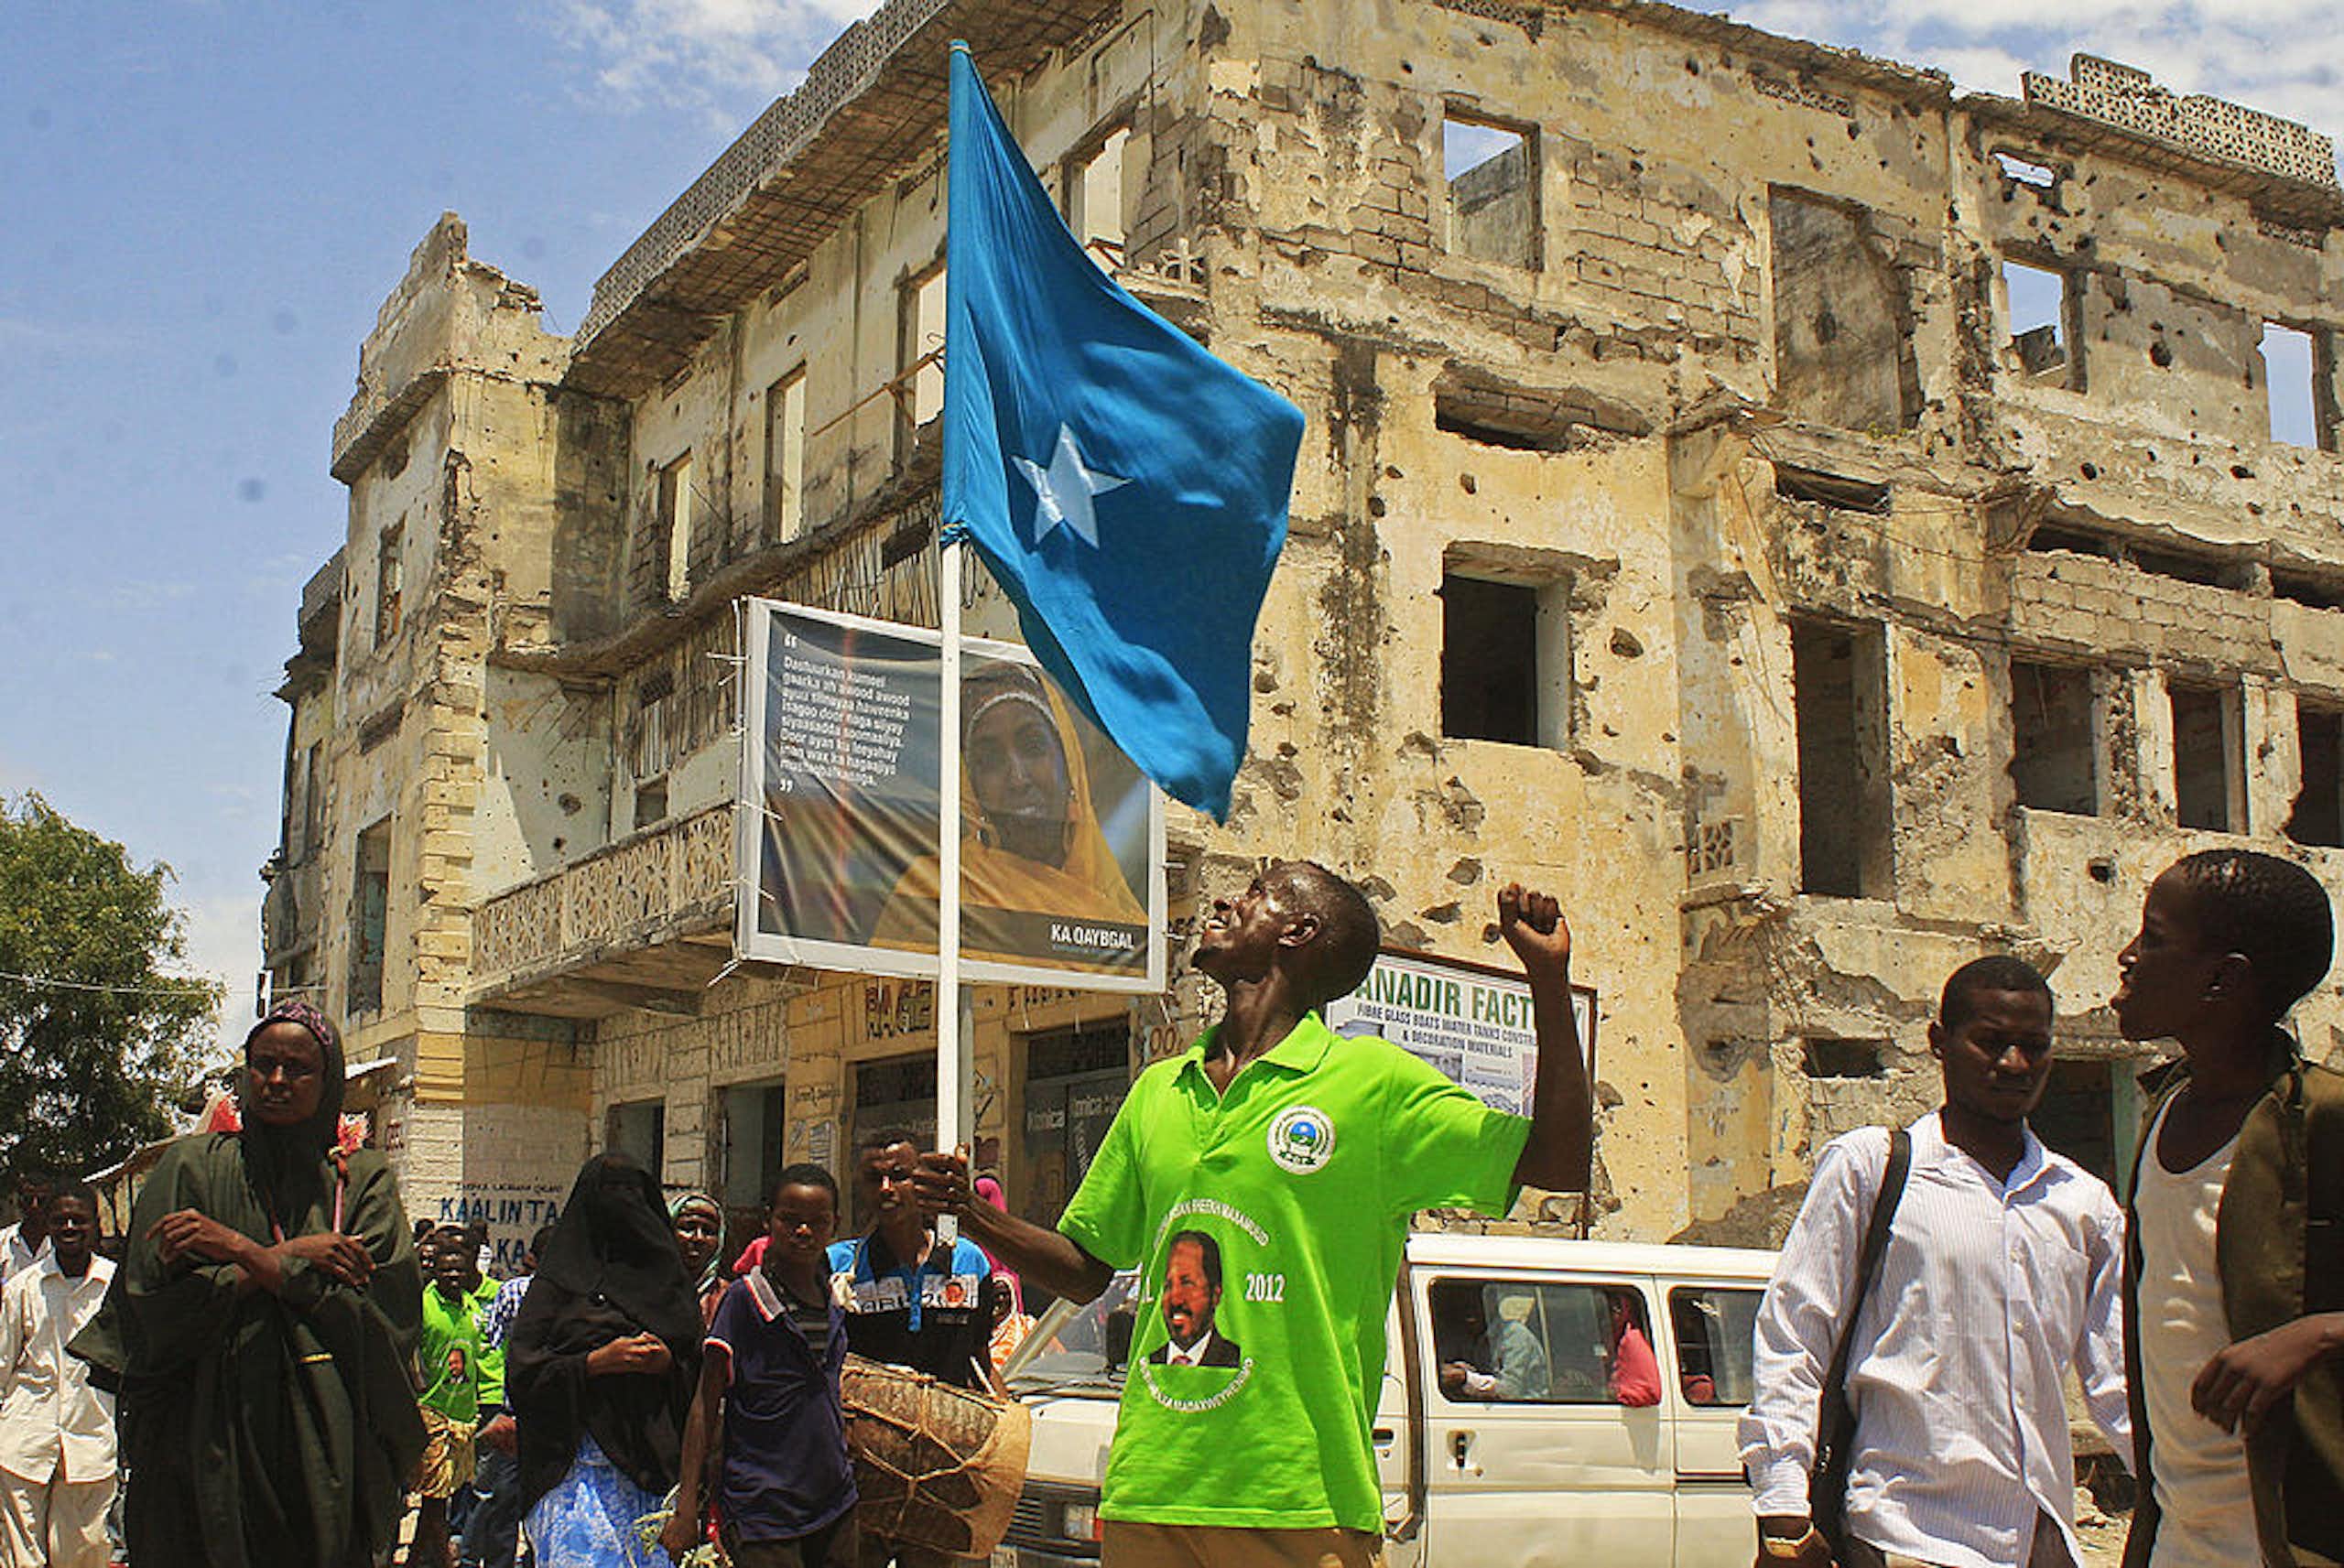 A man waves the Somali flag - blue with a white star in the middle - in front of a bombed-out building.